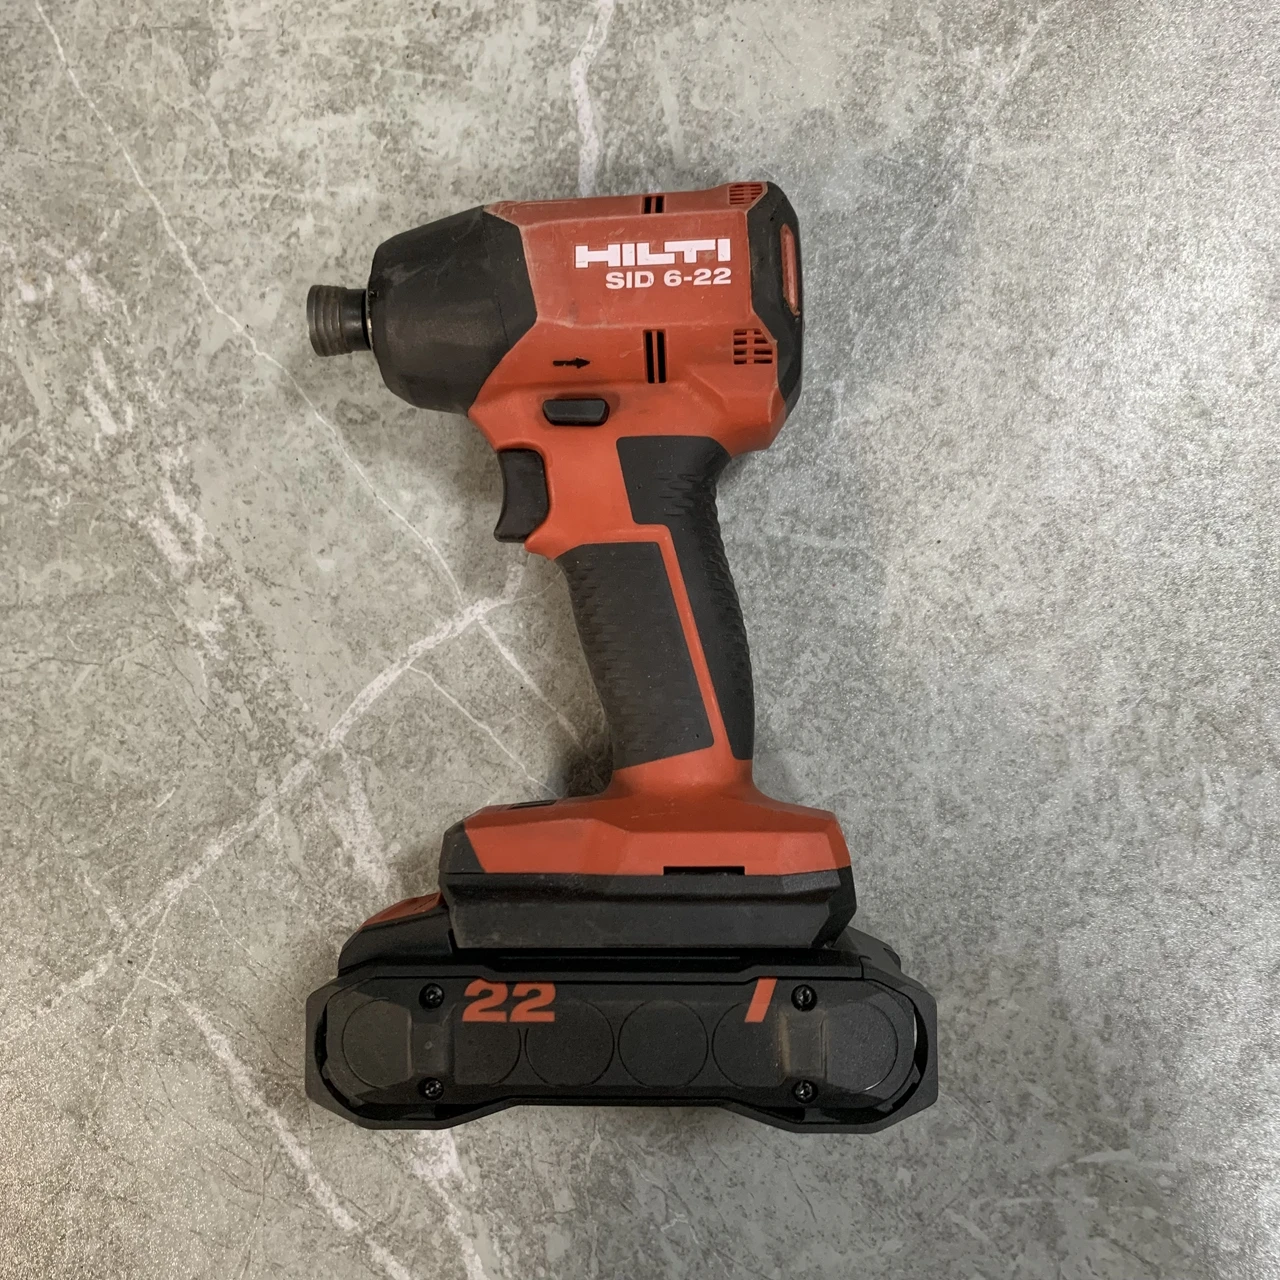 SID 6 HILTI NURON 22 Volt SID 6-22 Brushless & Cordless Impact Drill Driver Includes 4.0AH battery  second-hand